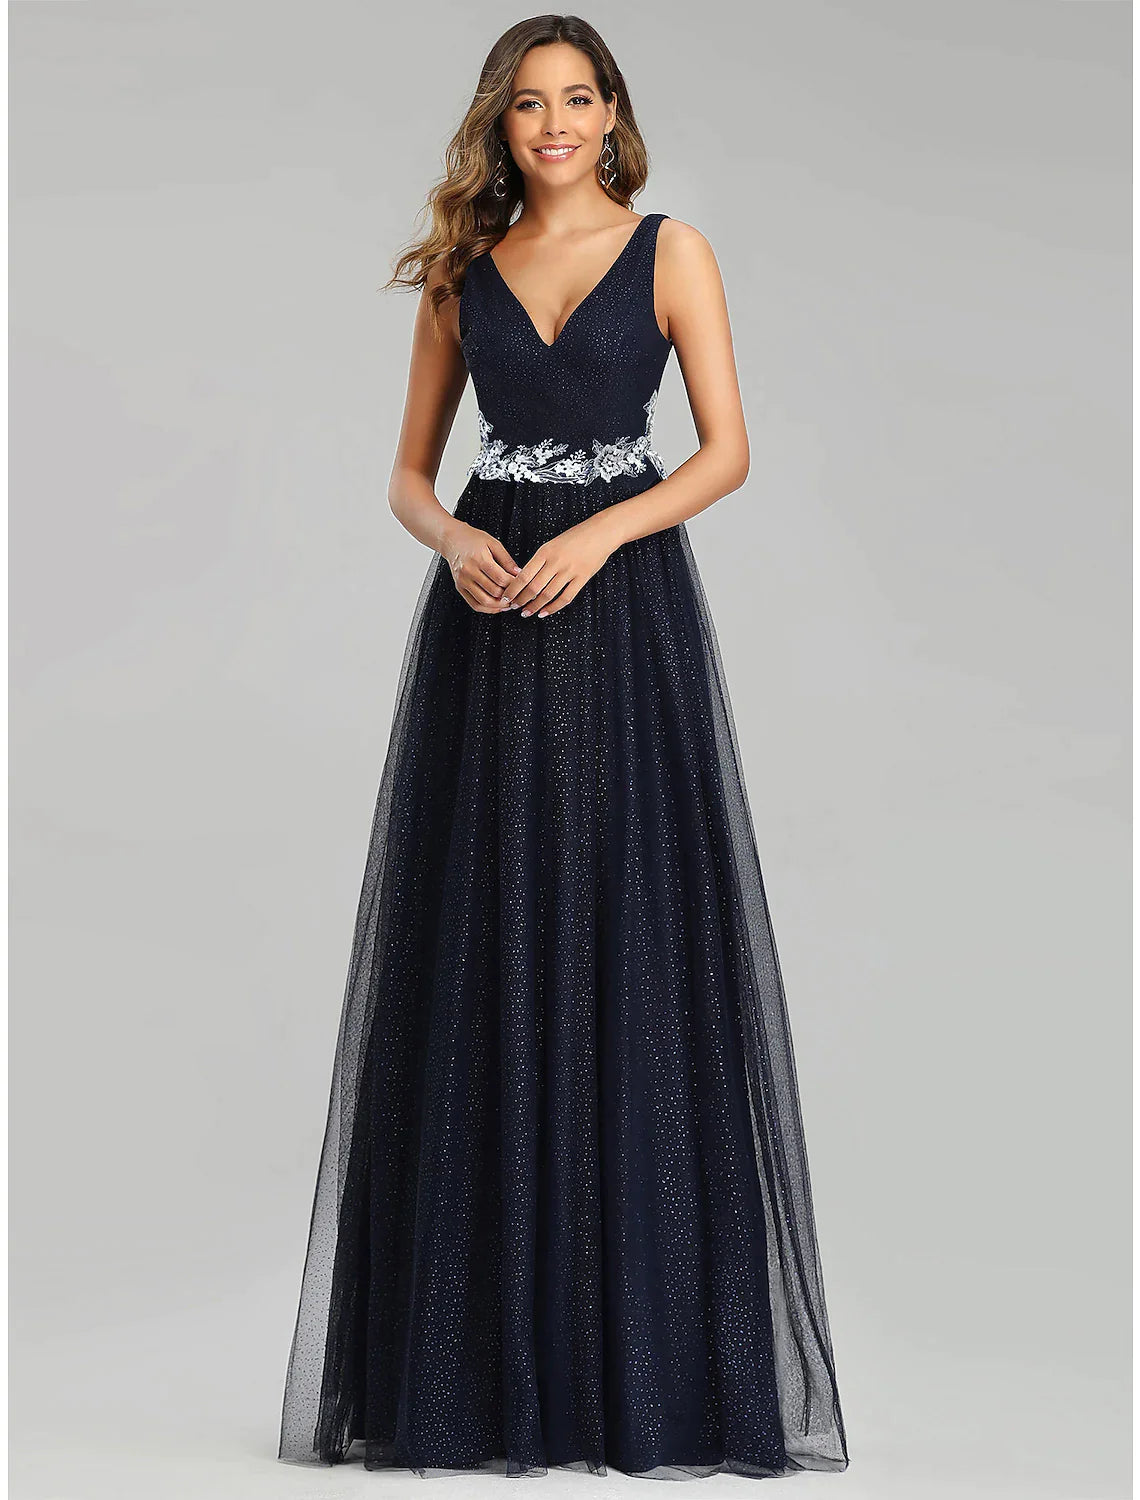 A-Line Prom Dresses Empire Dress Wedding Guest Floor Length Sleeveless V Neck Tulle with Sequin Appliques